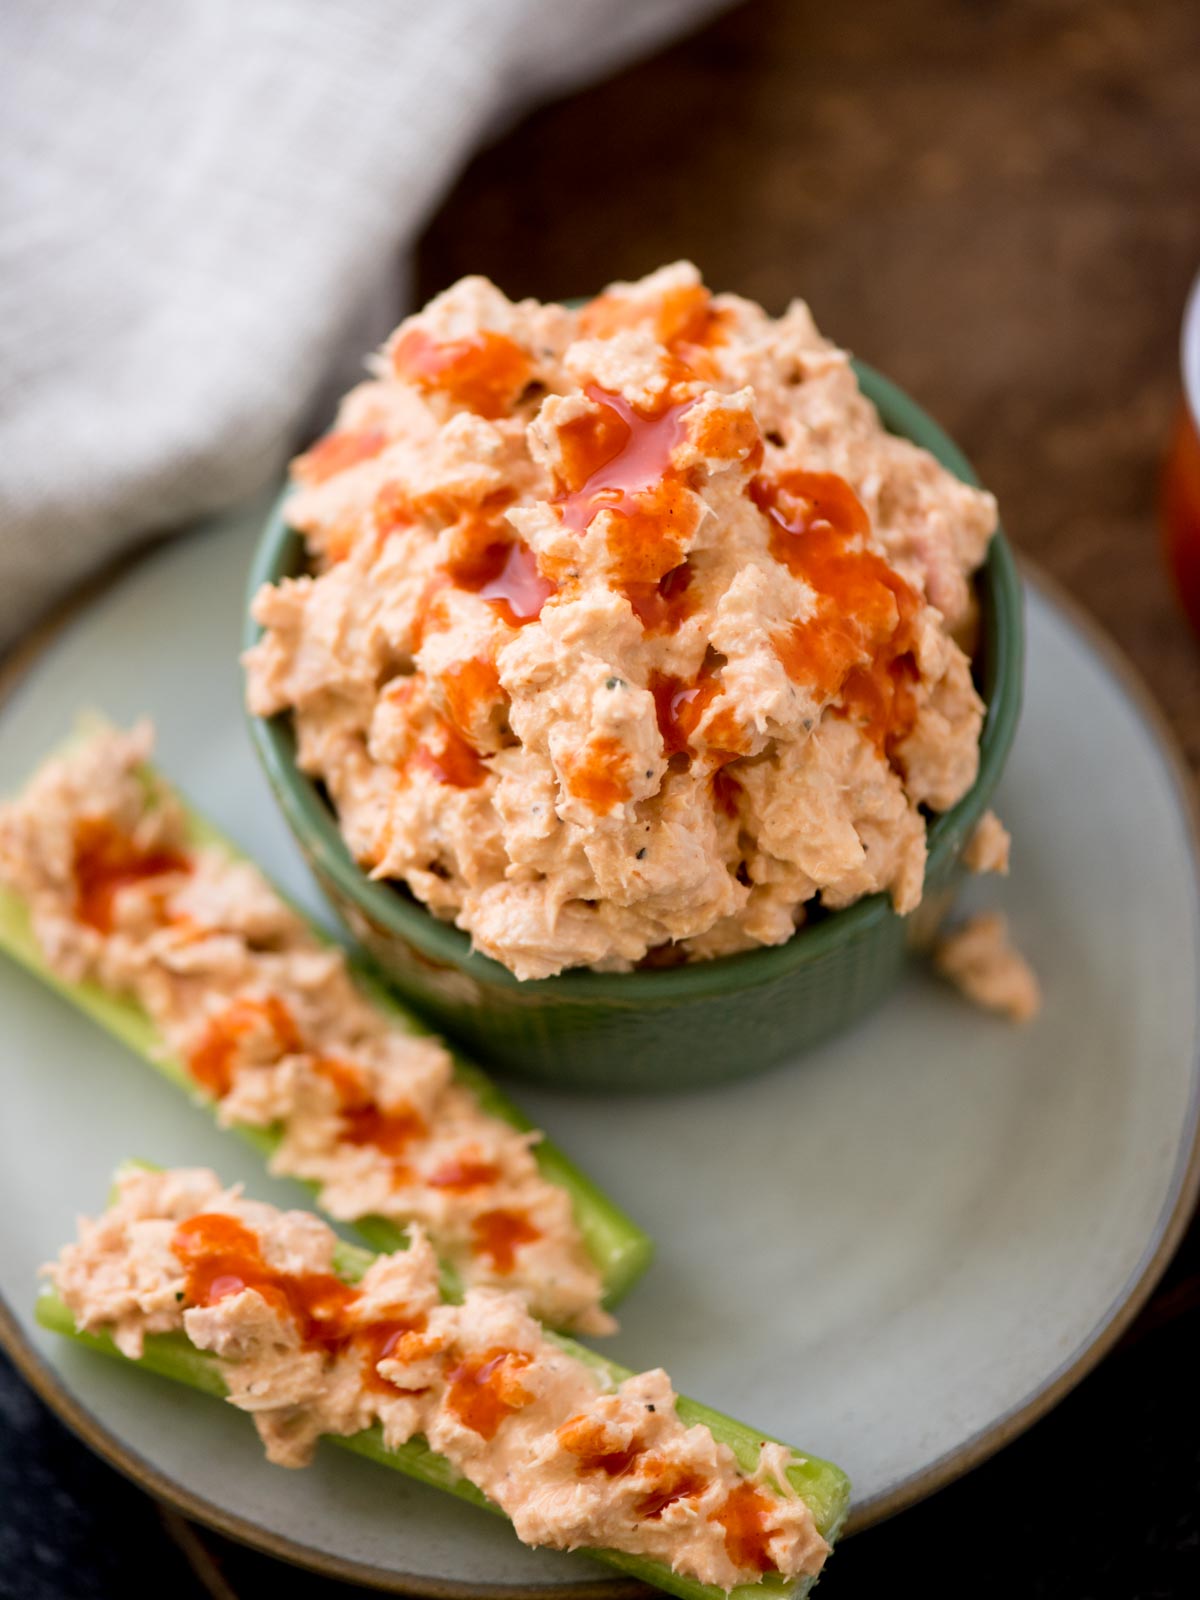 buffalo tuna salad in a bowl with tuna salad stuffed in celery on a plate. It's surrounded by buffalo sauce on a bread board and a kitchen towel.